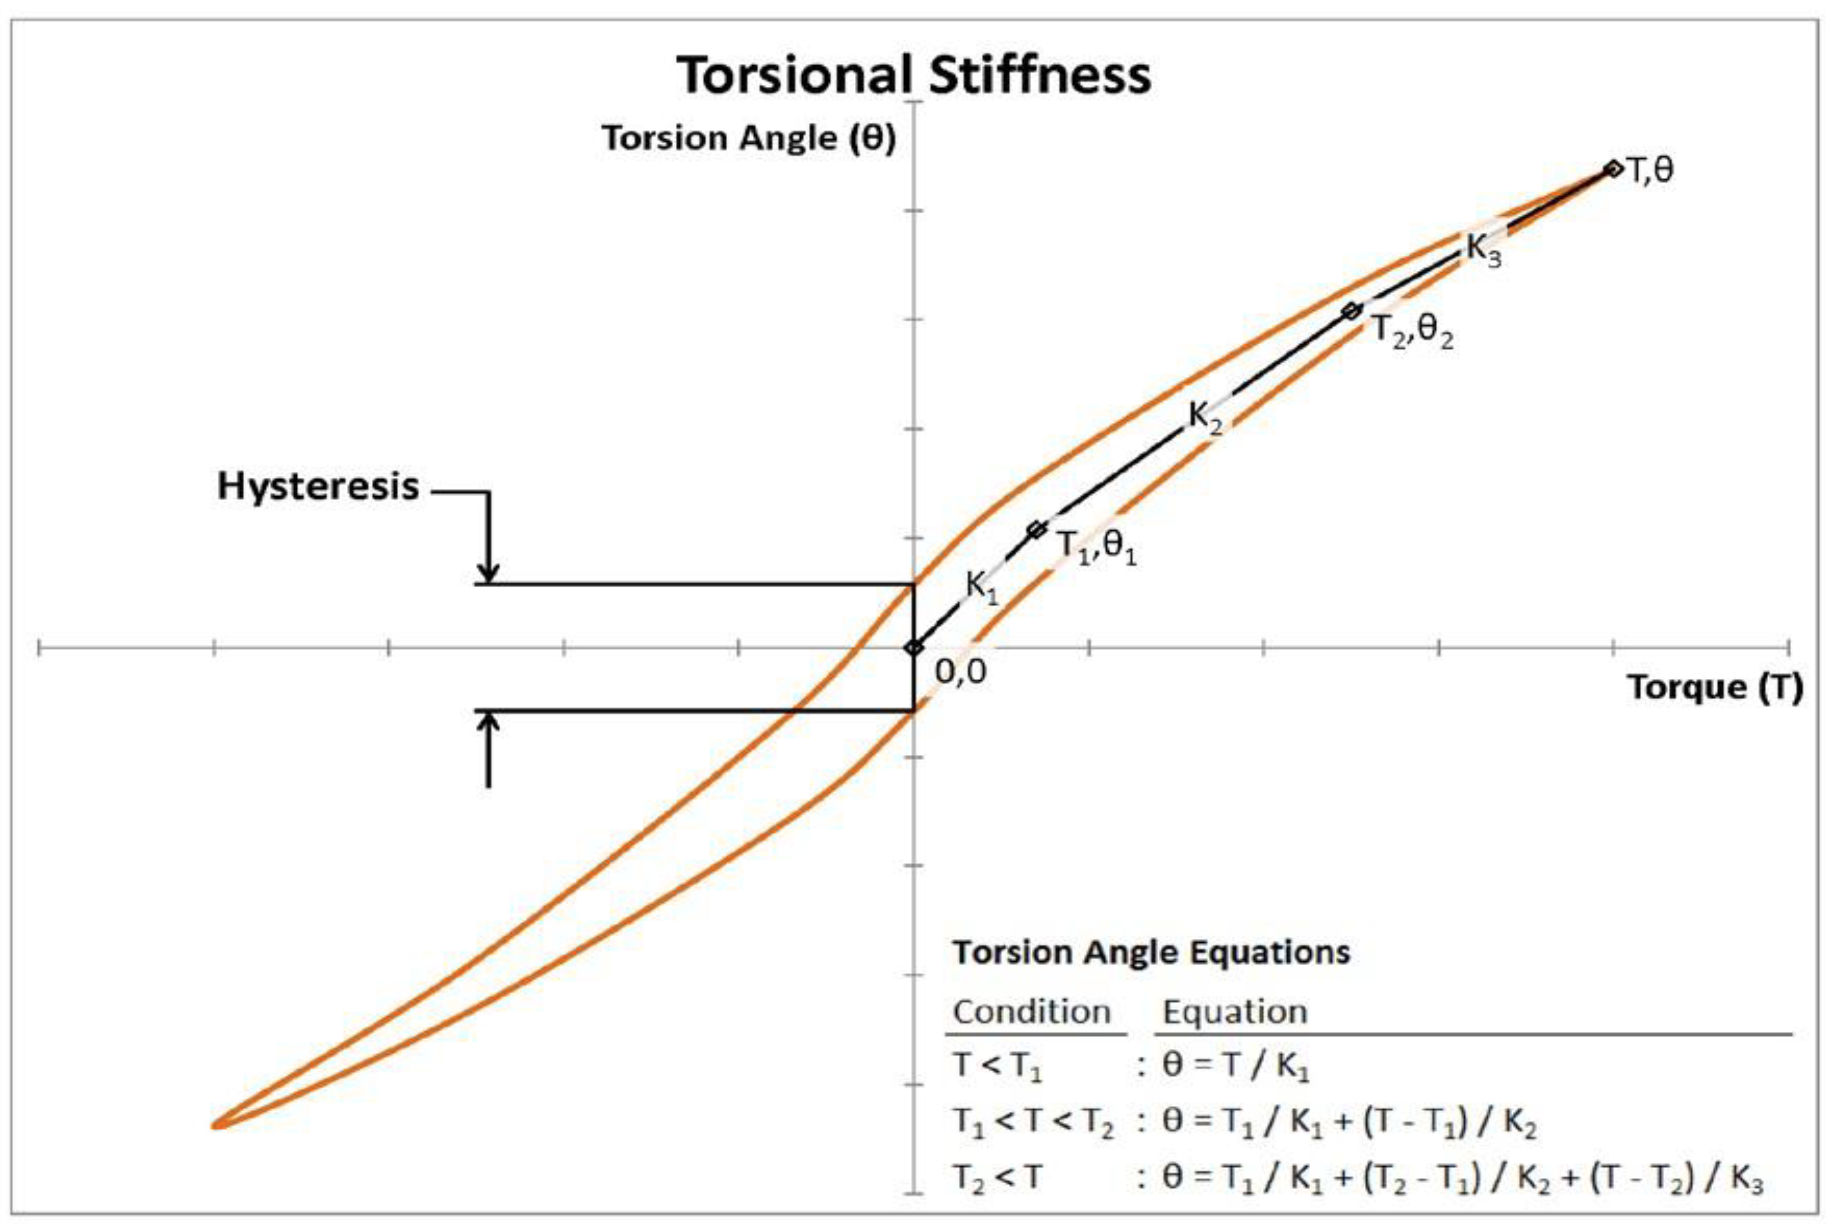 Figure 1 - Torsional Stiffness as a function Torque and Angle